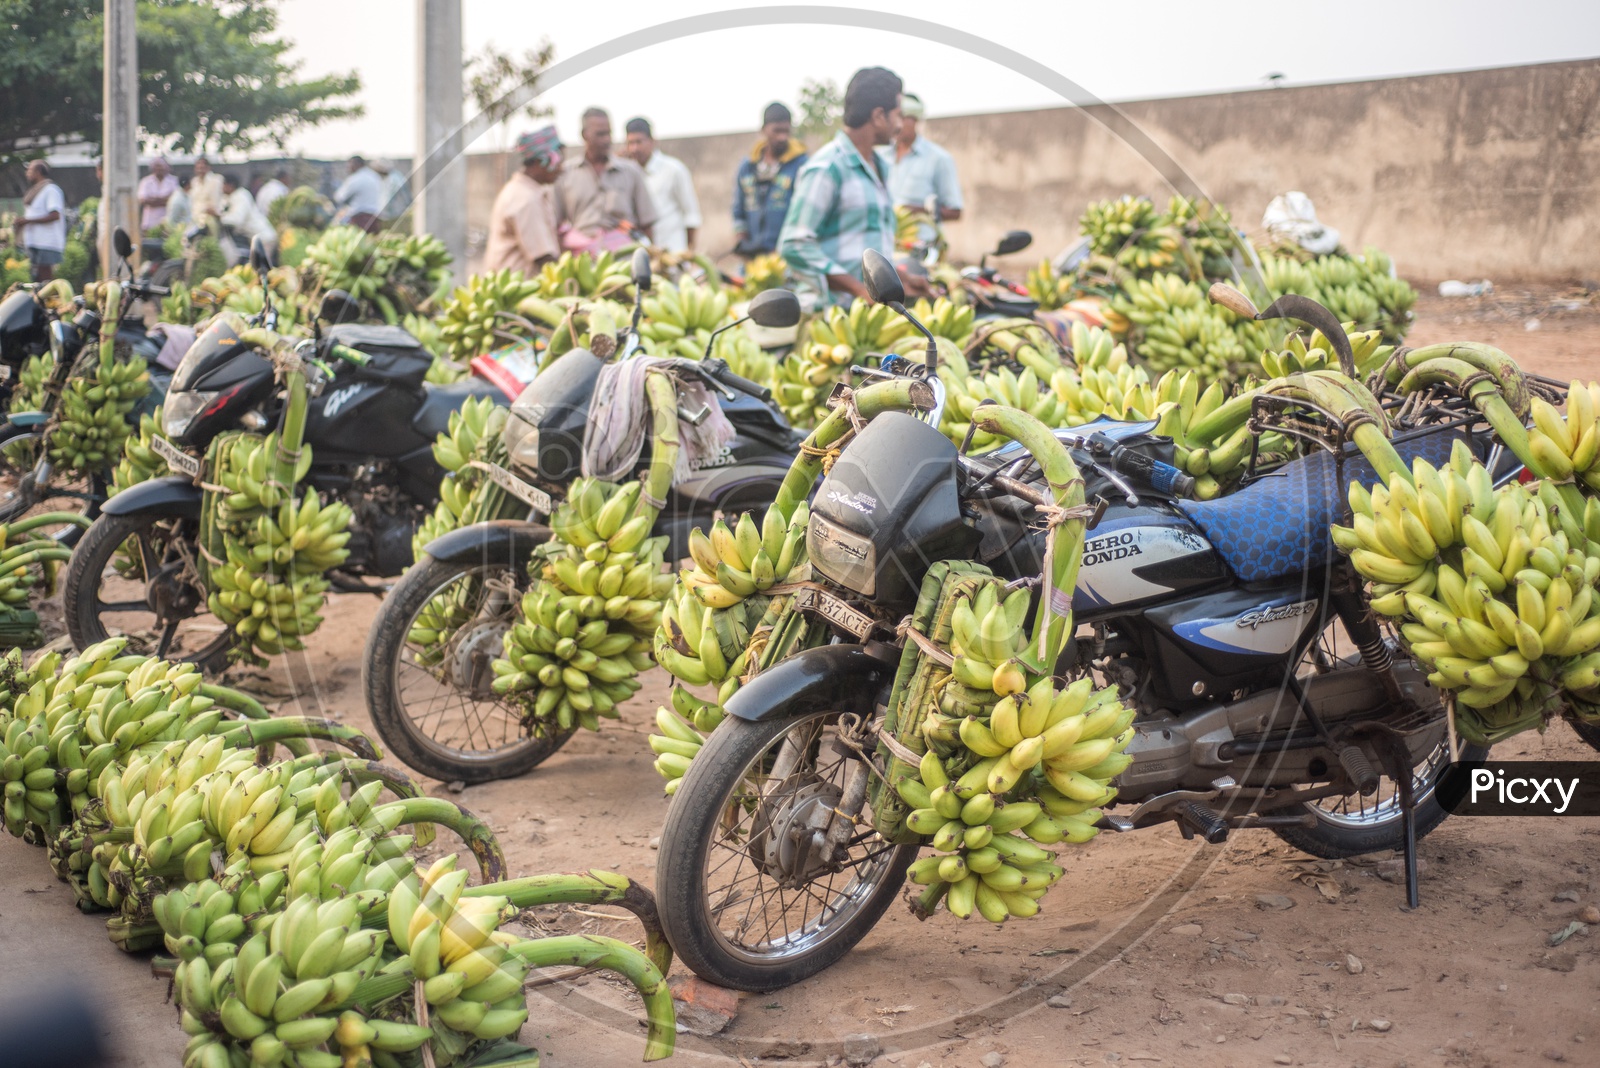 bikes filled with bananas